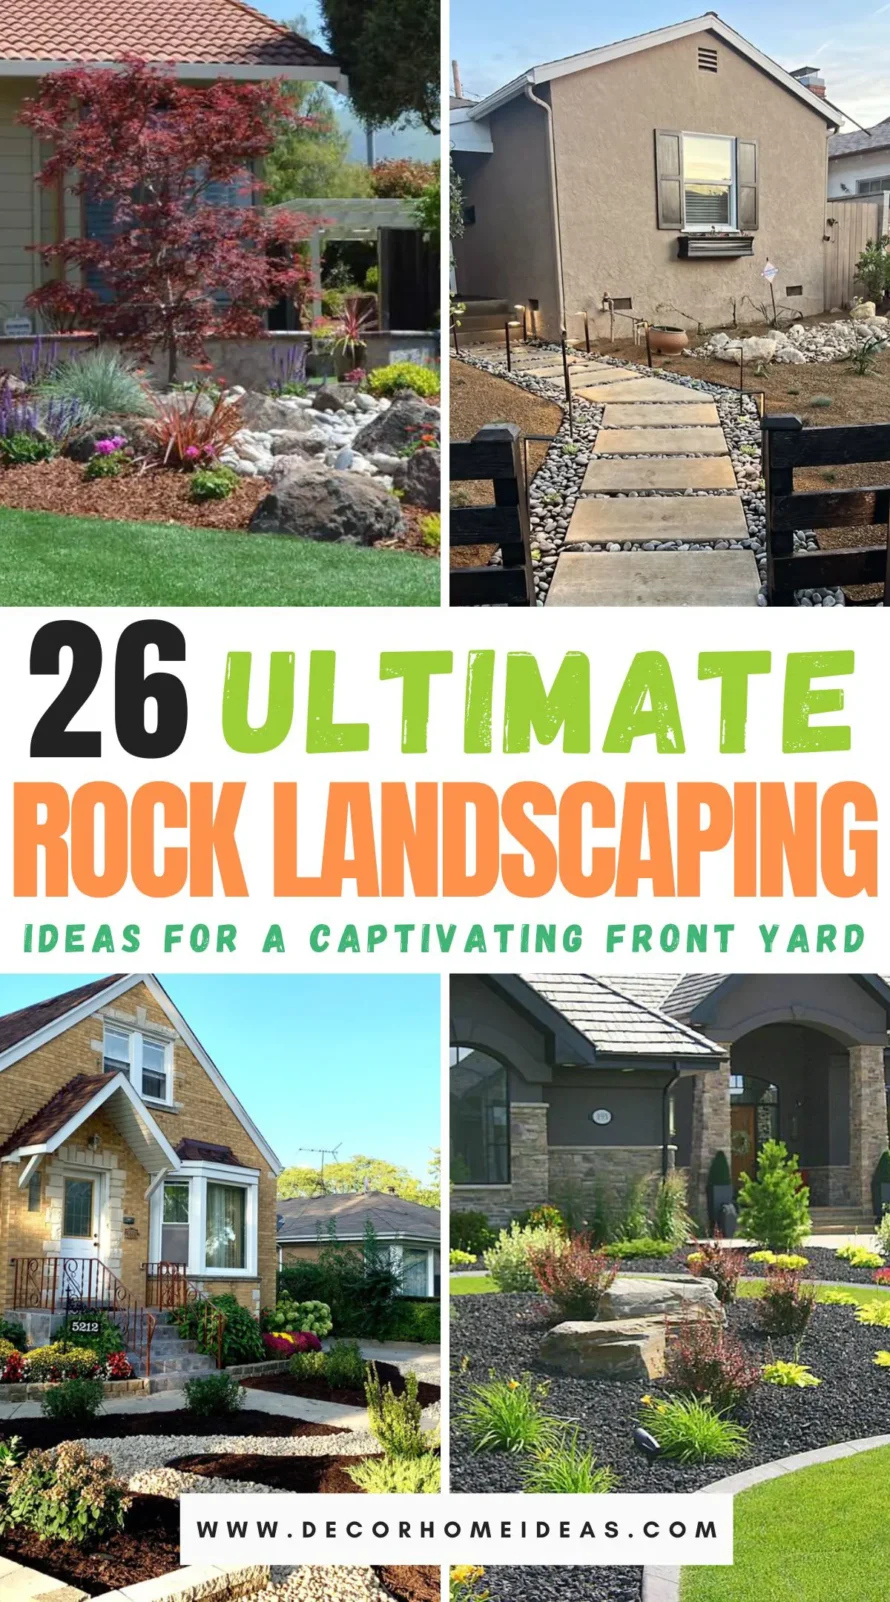 Discover 26 ultimate rock landscaping ideas to transform your front yard into a captivating oasis. From rustic boulder arrangements to elegant pebble pathways, these designs offer endless inspiration for creating a stunning outdoor space.